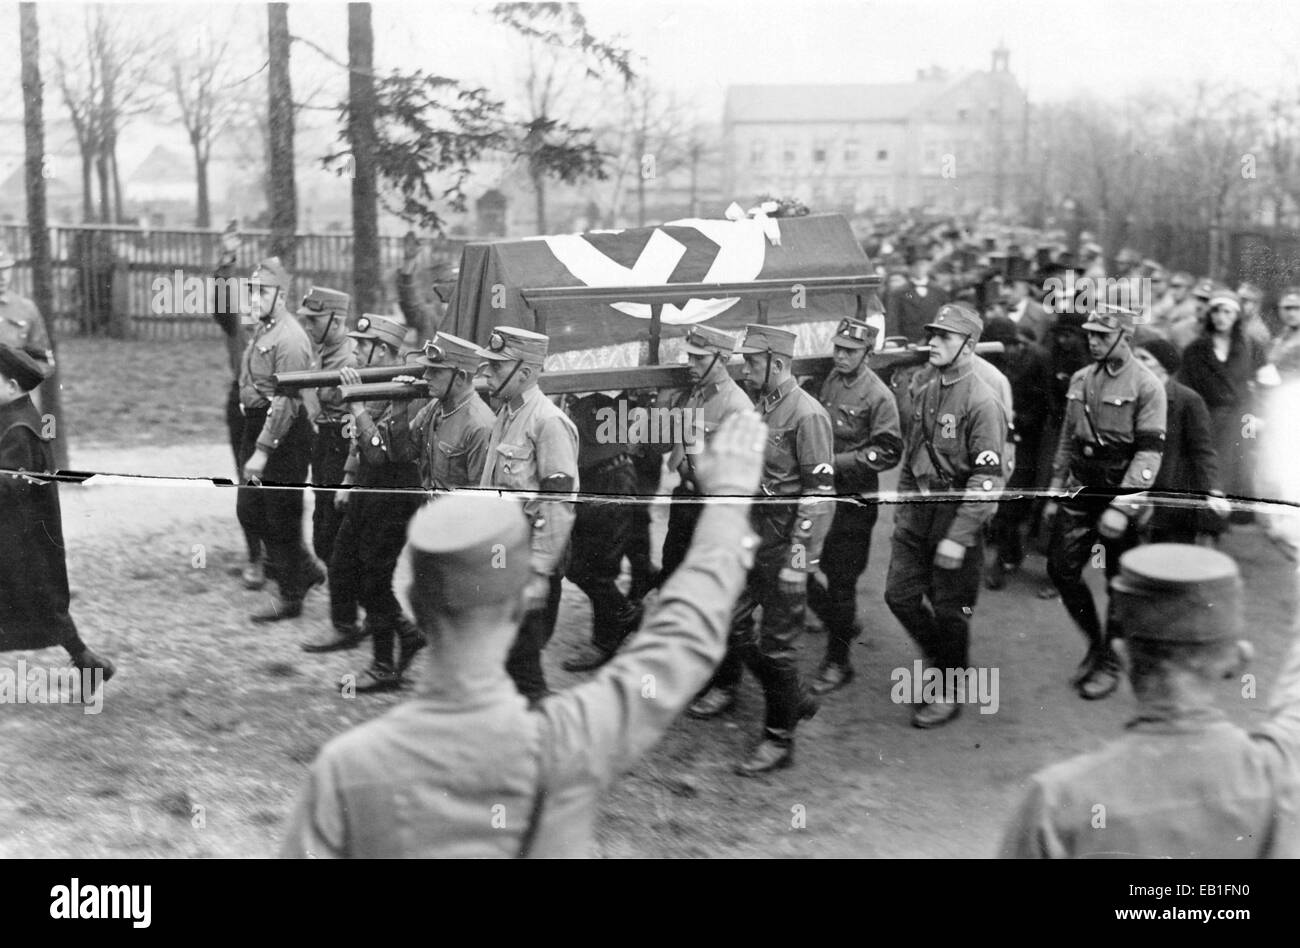 SA (Sturmabteilung) members carry the coffin, covered with a Nazi flag, of their comrade Walter Thriemer, who was killed in street fighting for the so-called 'Kampf für die Bewegung' (Fight for the Movement), in Saxony in 1931. Fotoarchiv für Zeitgeschichtee - NO WIRE SERVICE Stock Photo